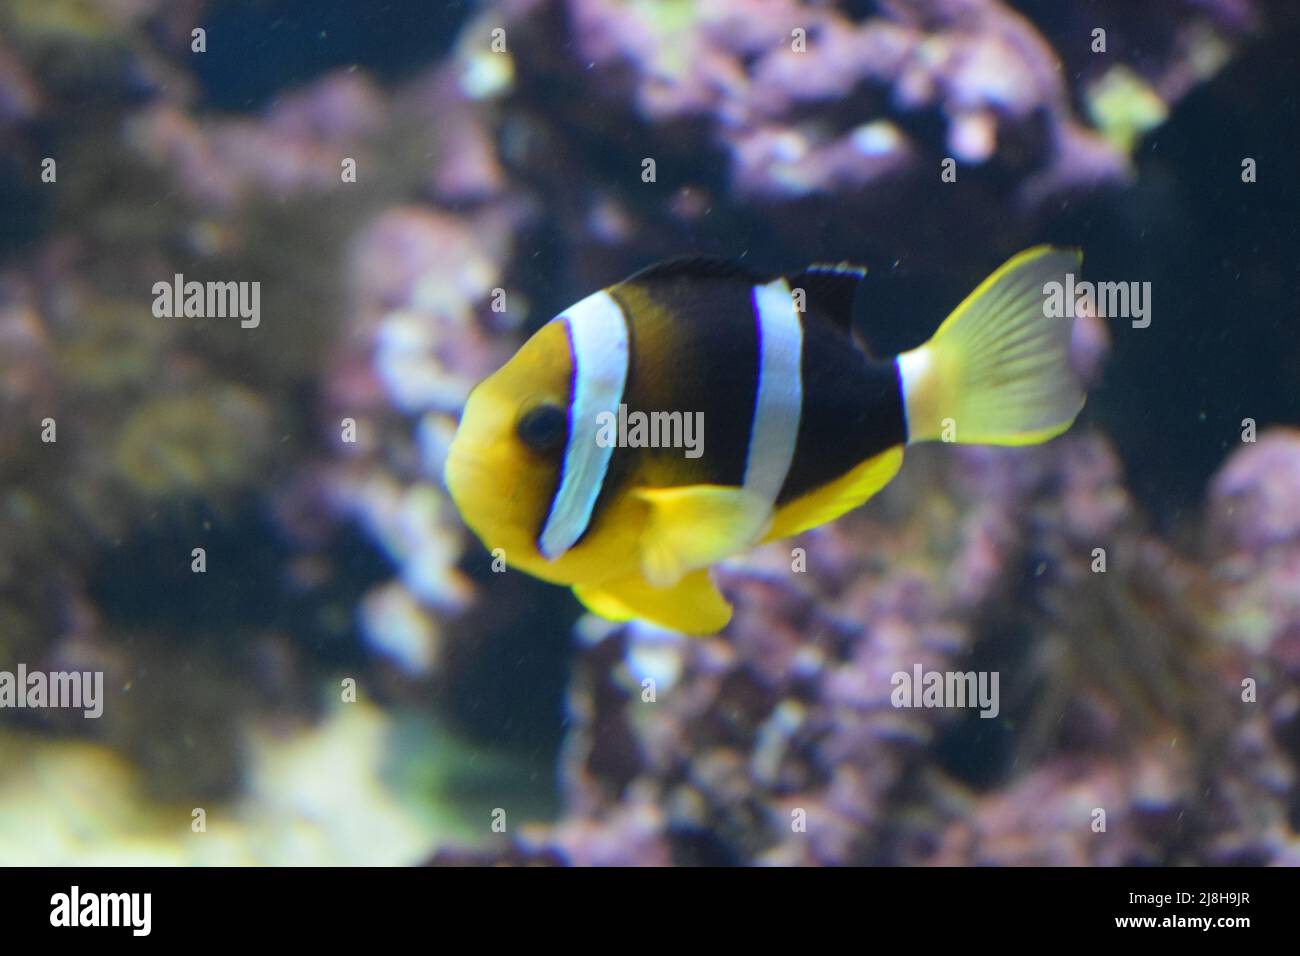 Amphiprion sebae. Clownfish or anemonefish are fishes from the subfamily Amphiprioninae in the family Pomacentridae. Sebae Clownfish swimming in reef Stock Photo